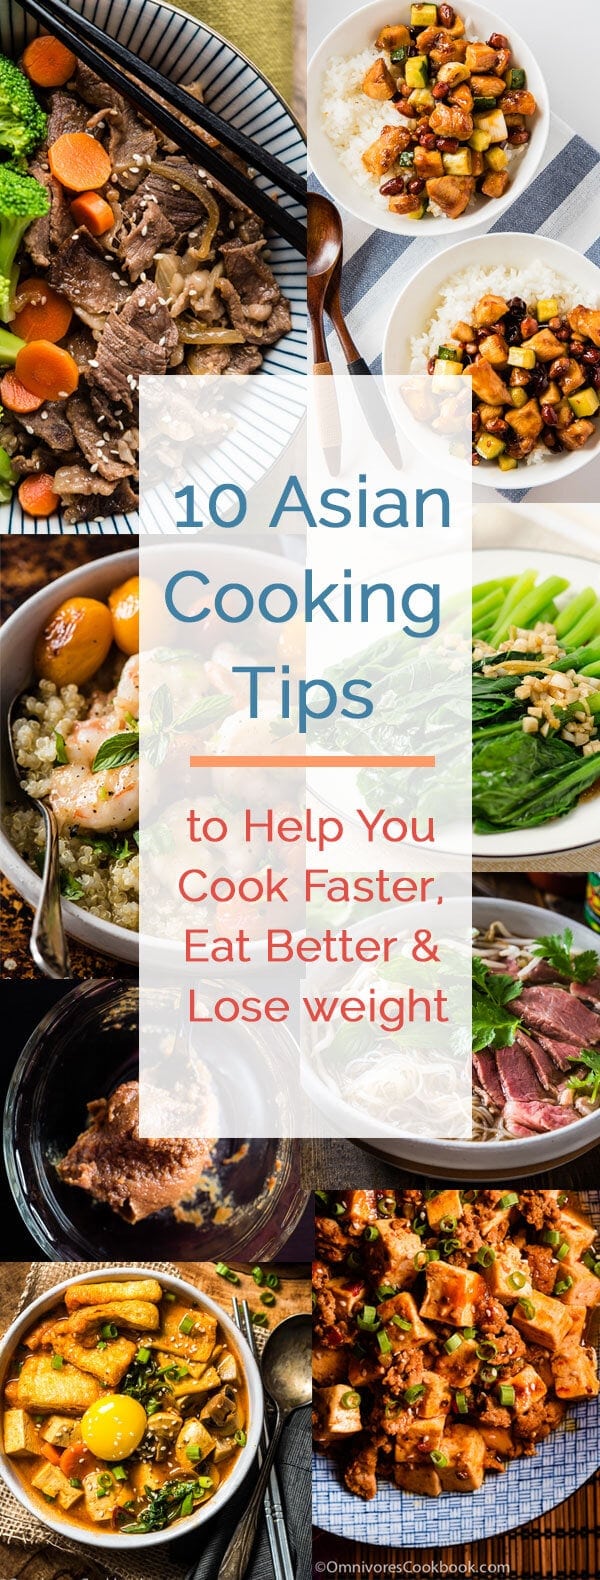 10 Asian Cooking Tips to Help You Cook Faster, Eat Better & Lose weight | omnivorescookbook.com